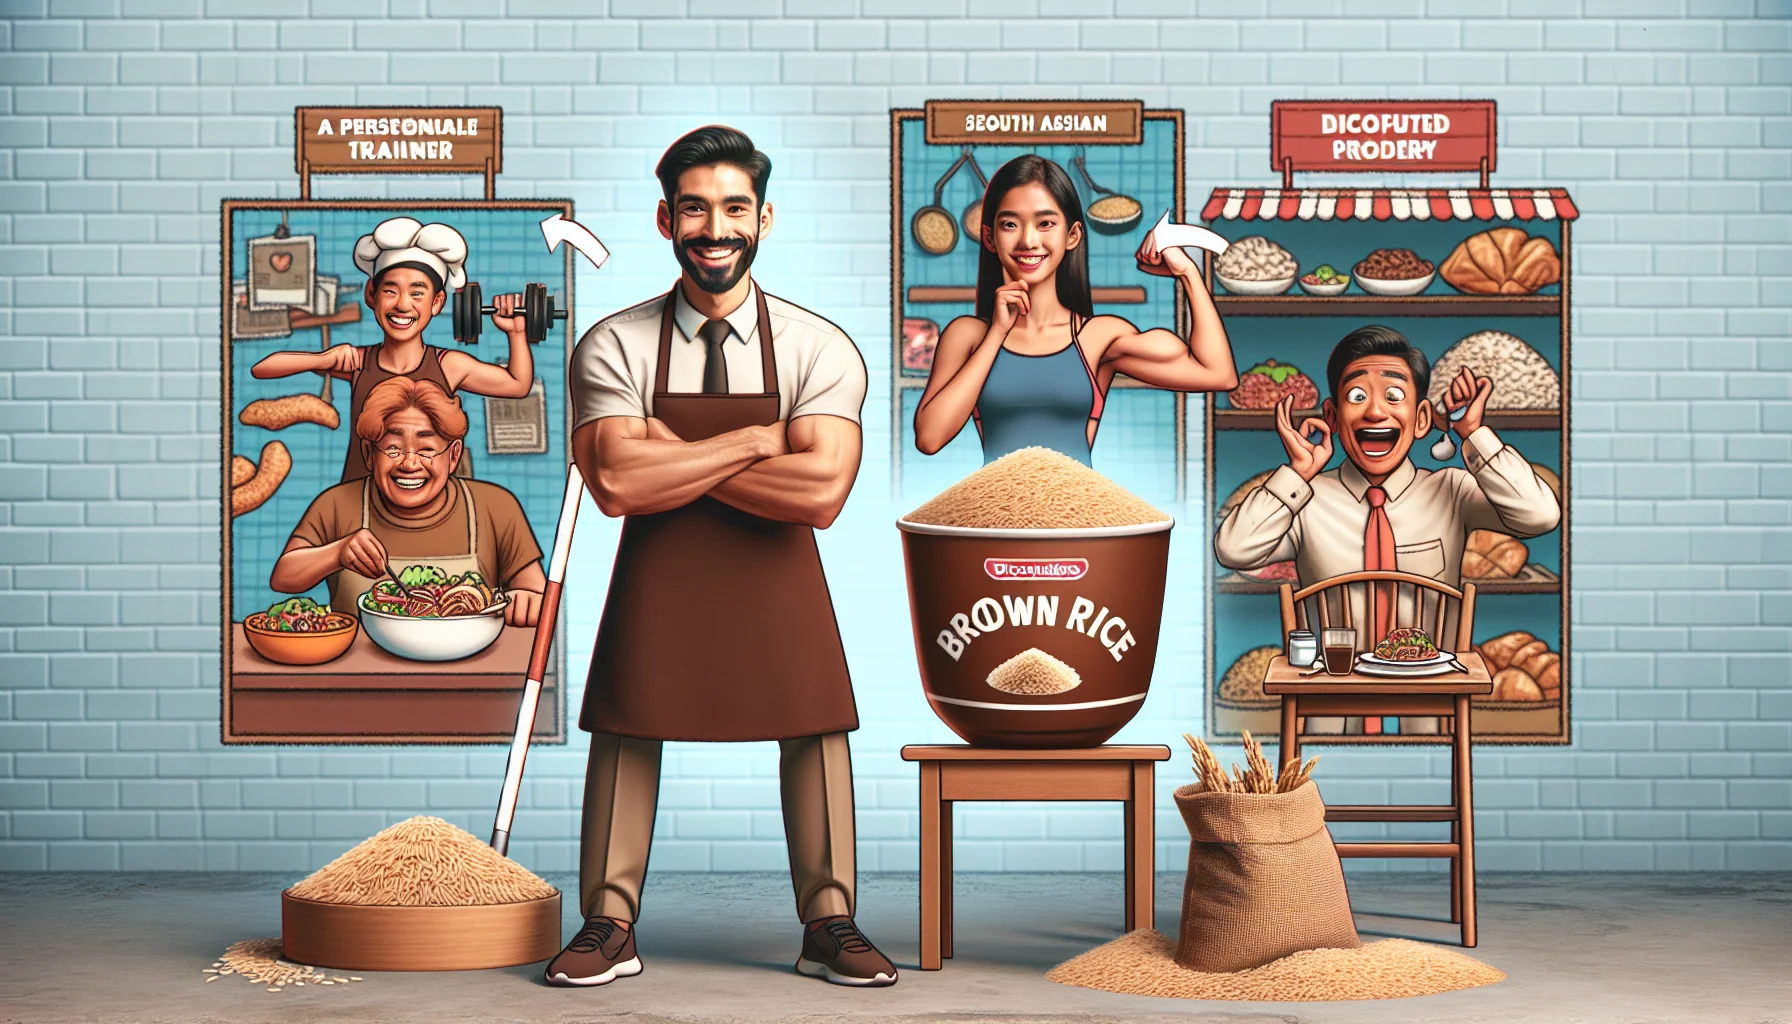 Generate a humorous and realistic image that highlights the versatility of brown rice. In this scene, three main areas should be depicted. The first is a man who is a Caucasian personal trainer, and a South Asian woman who is a chef, both preparing dishes with brown rice. The second section is a mini grocery store where brown rice is prominently displayed with an attractive discounted price label. The third part shows an imaginative scenario where a Hispanic family is joyfully dining on various meals made from brown rice, expressing their surprise at the delicious flavors. This visual summary should encourage the viewers to consider purchasing brown rice for affordable and healthy food options.